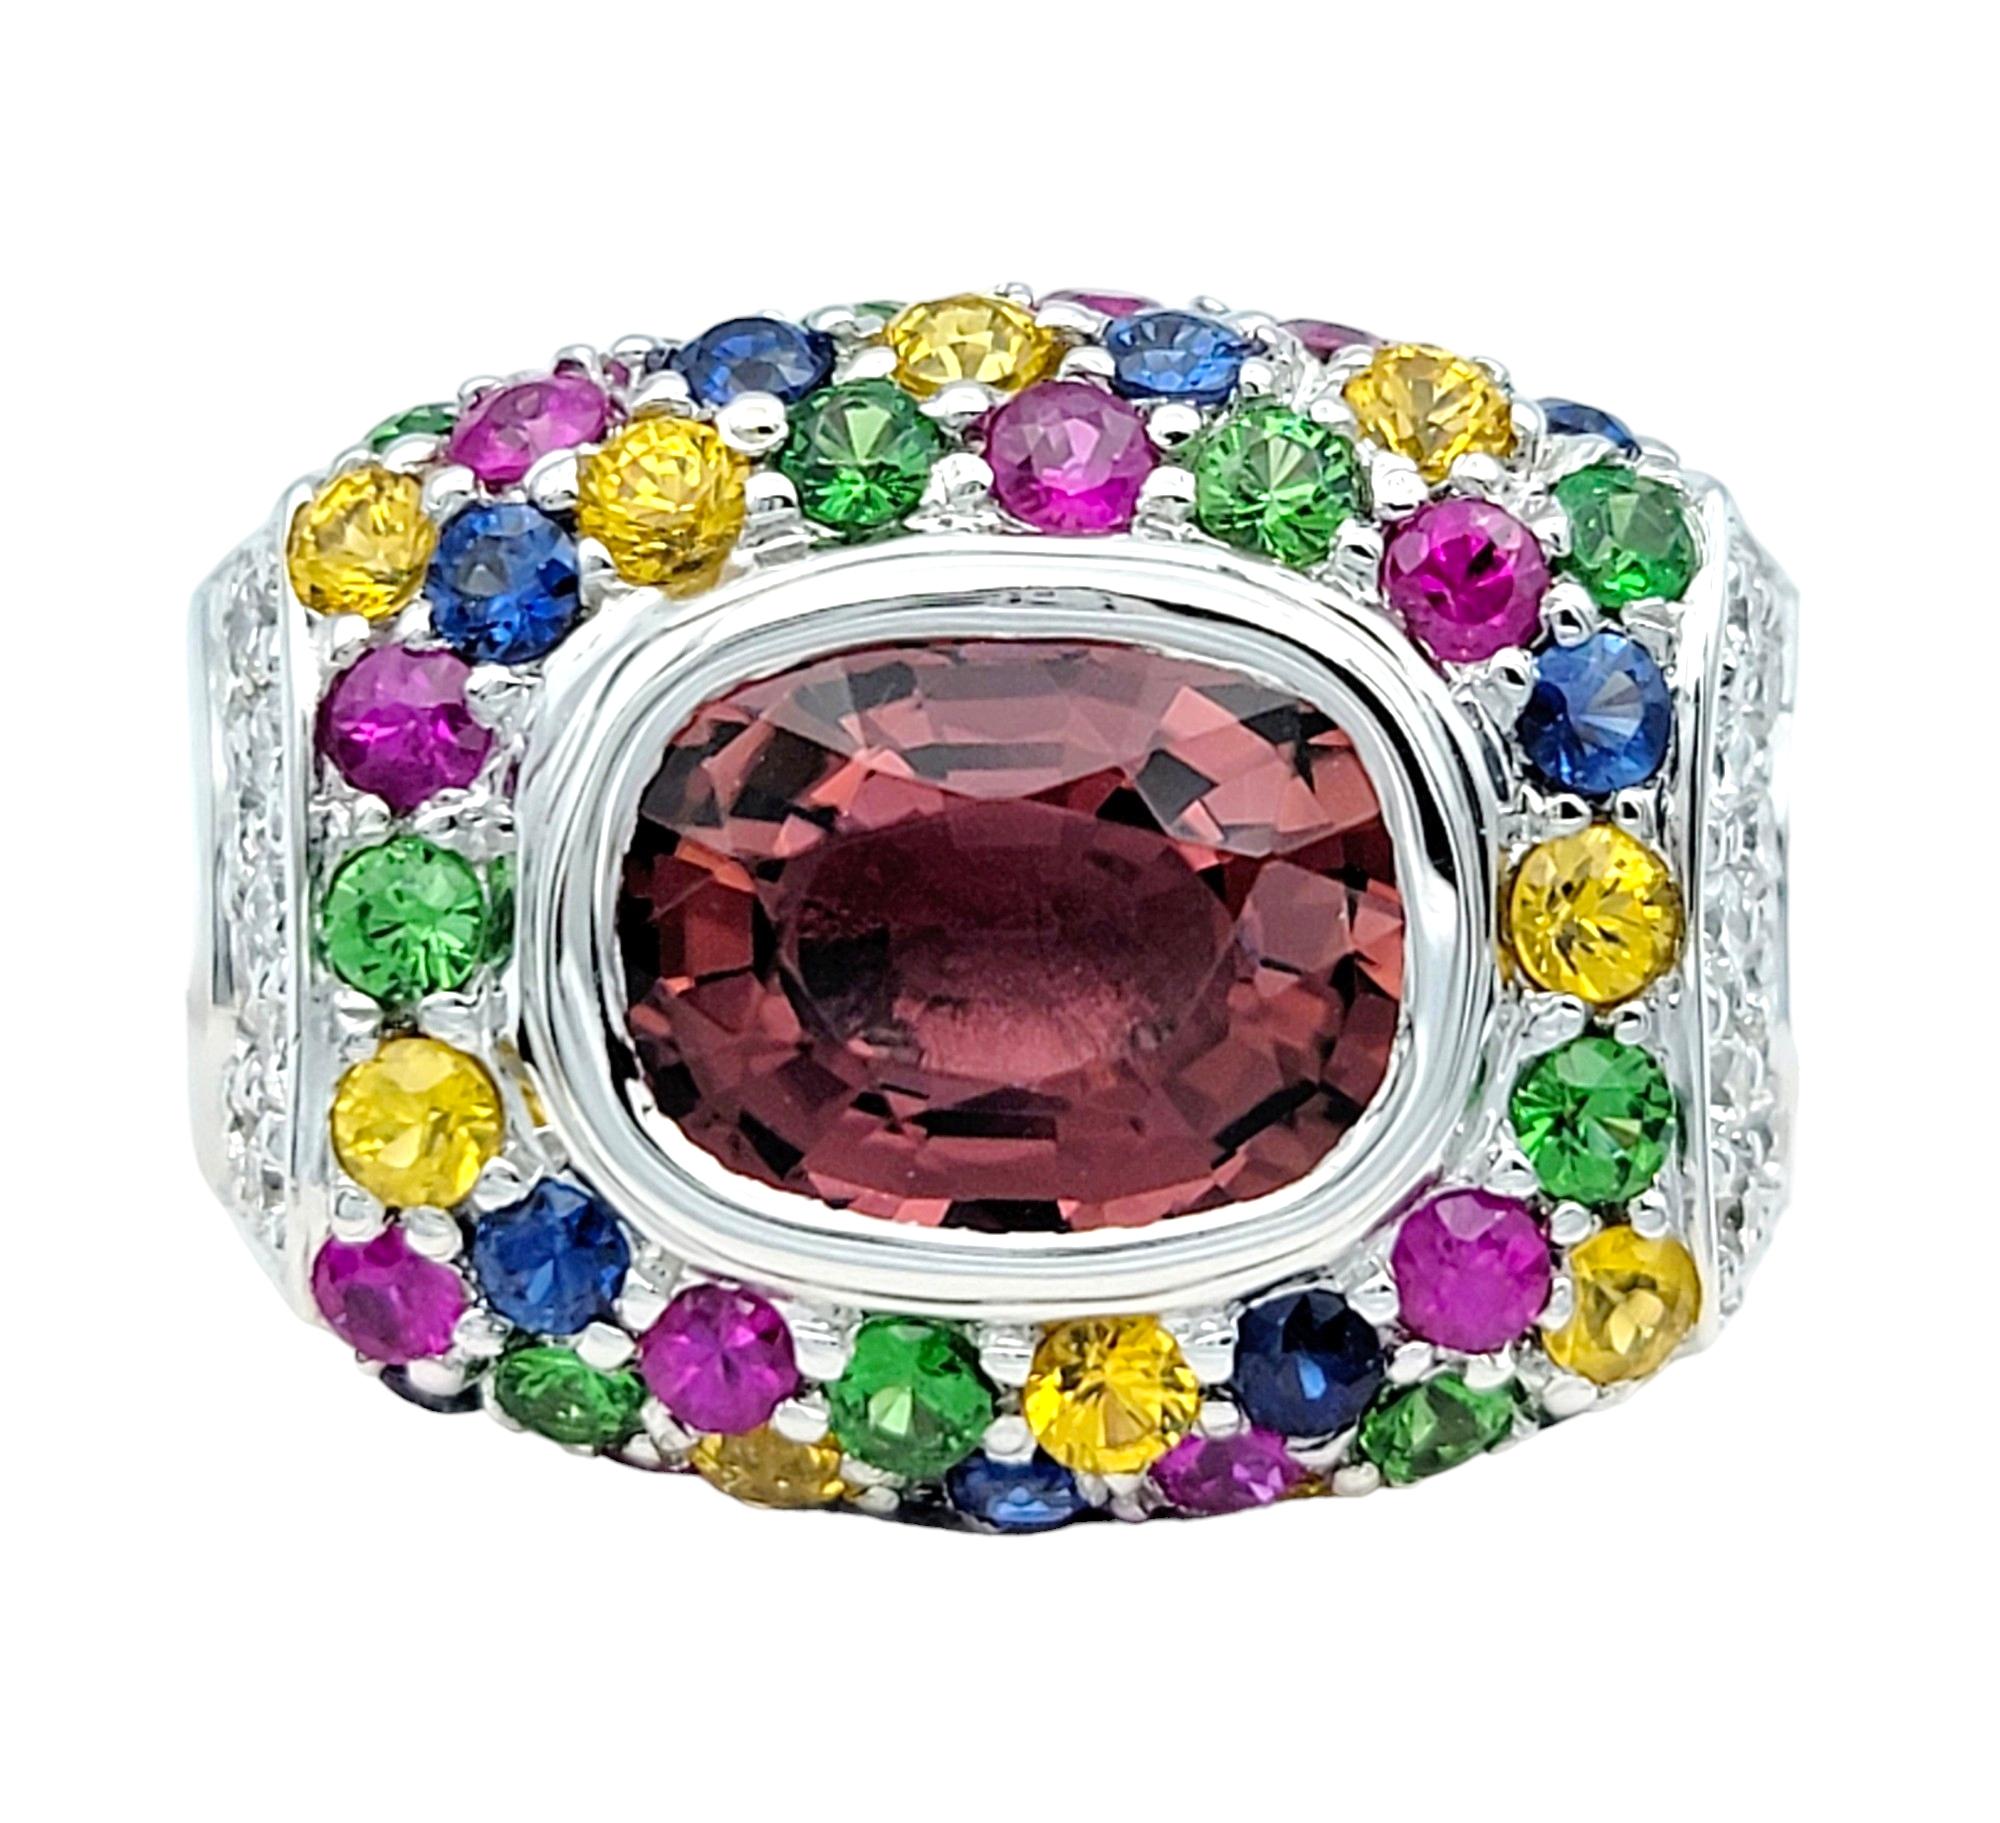 Cushion Cut Sonia B. Multi-Colored Gemstone Squared Cocktail Ring Set in 18 Karat White Gold For Sale